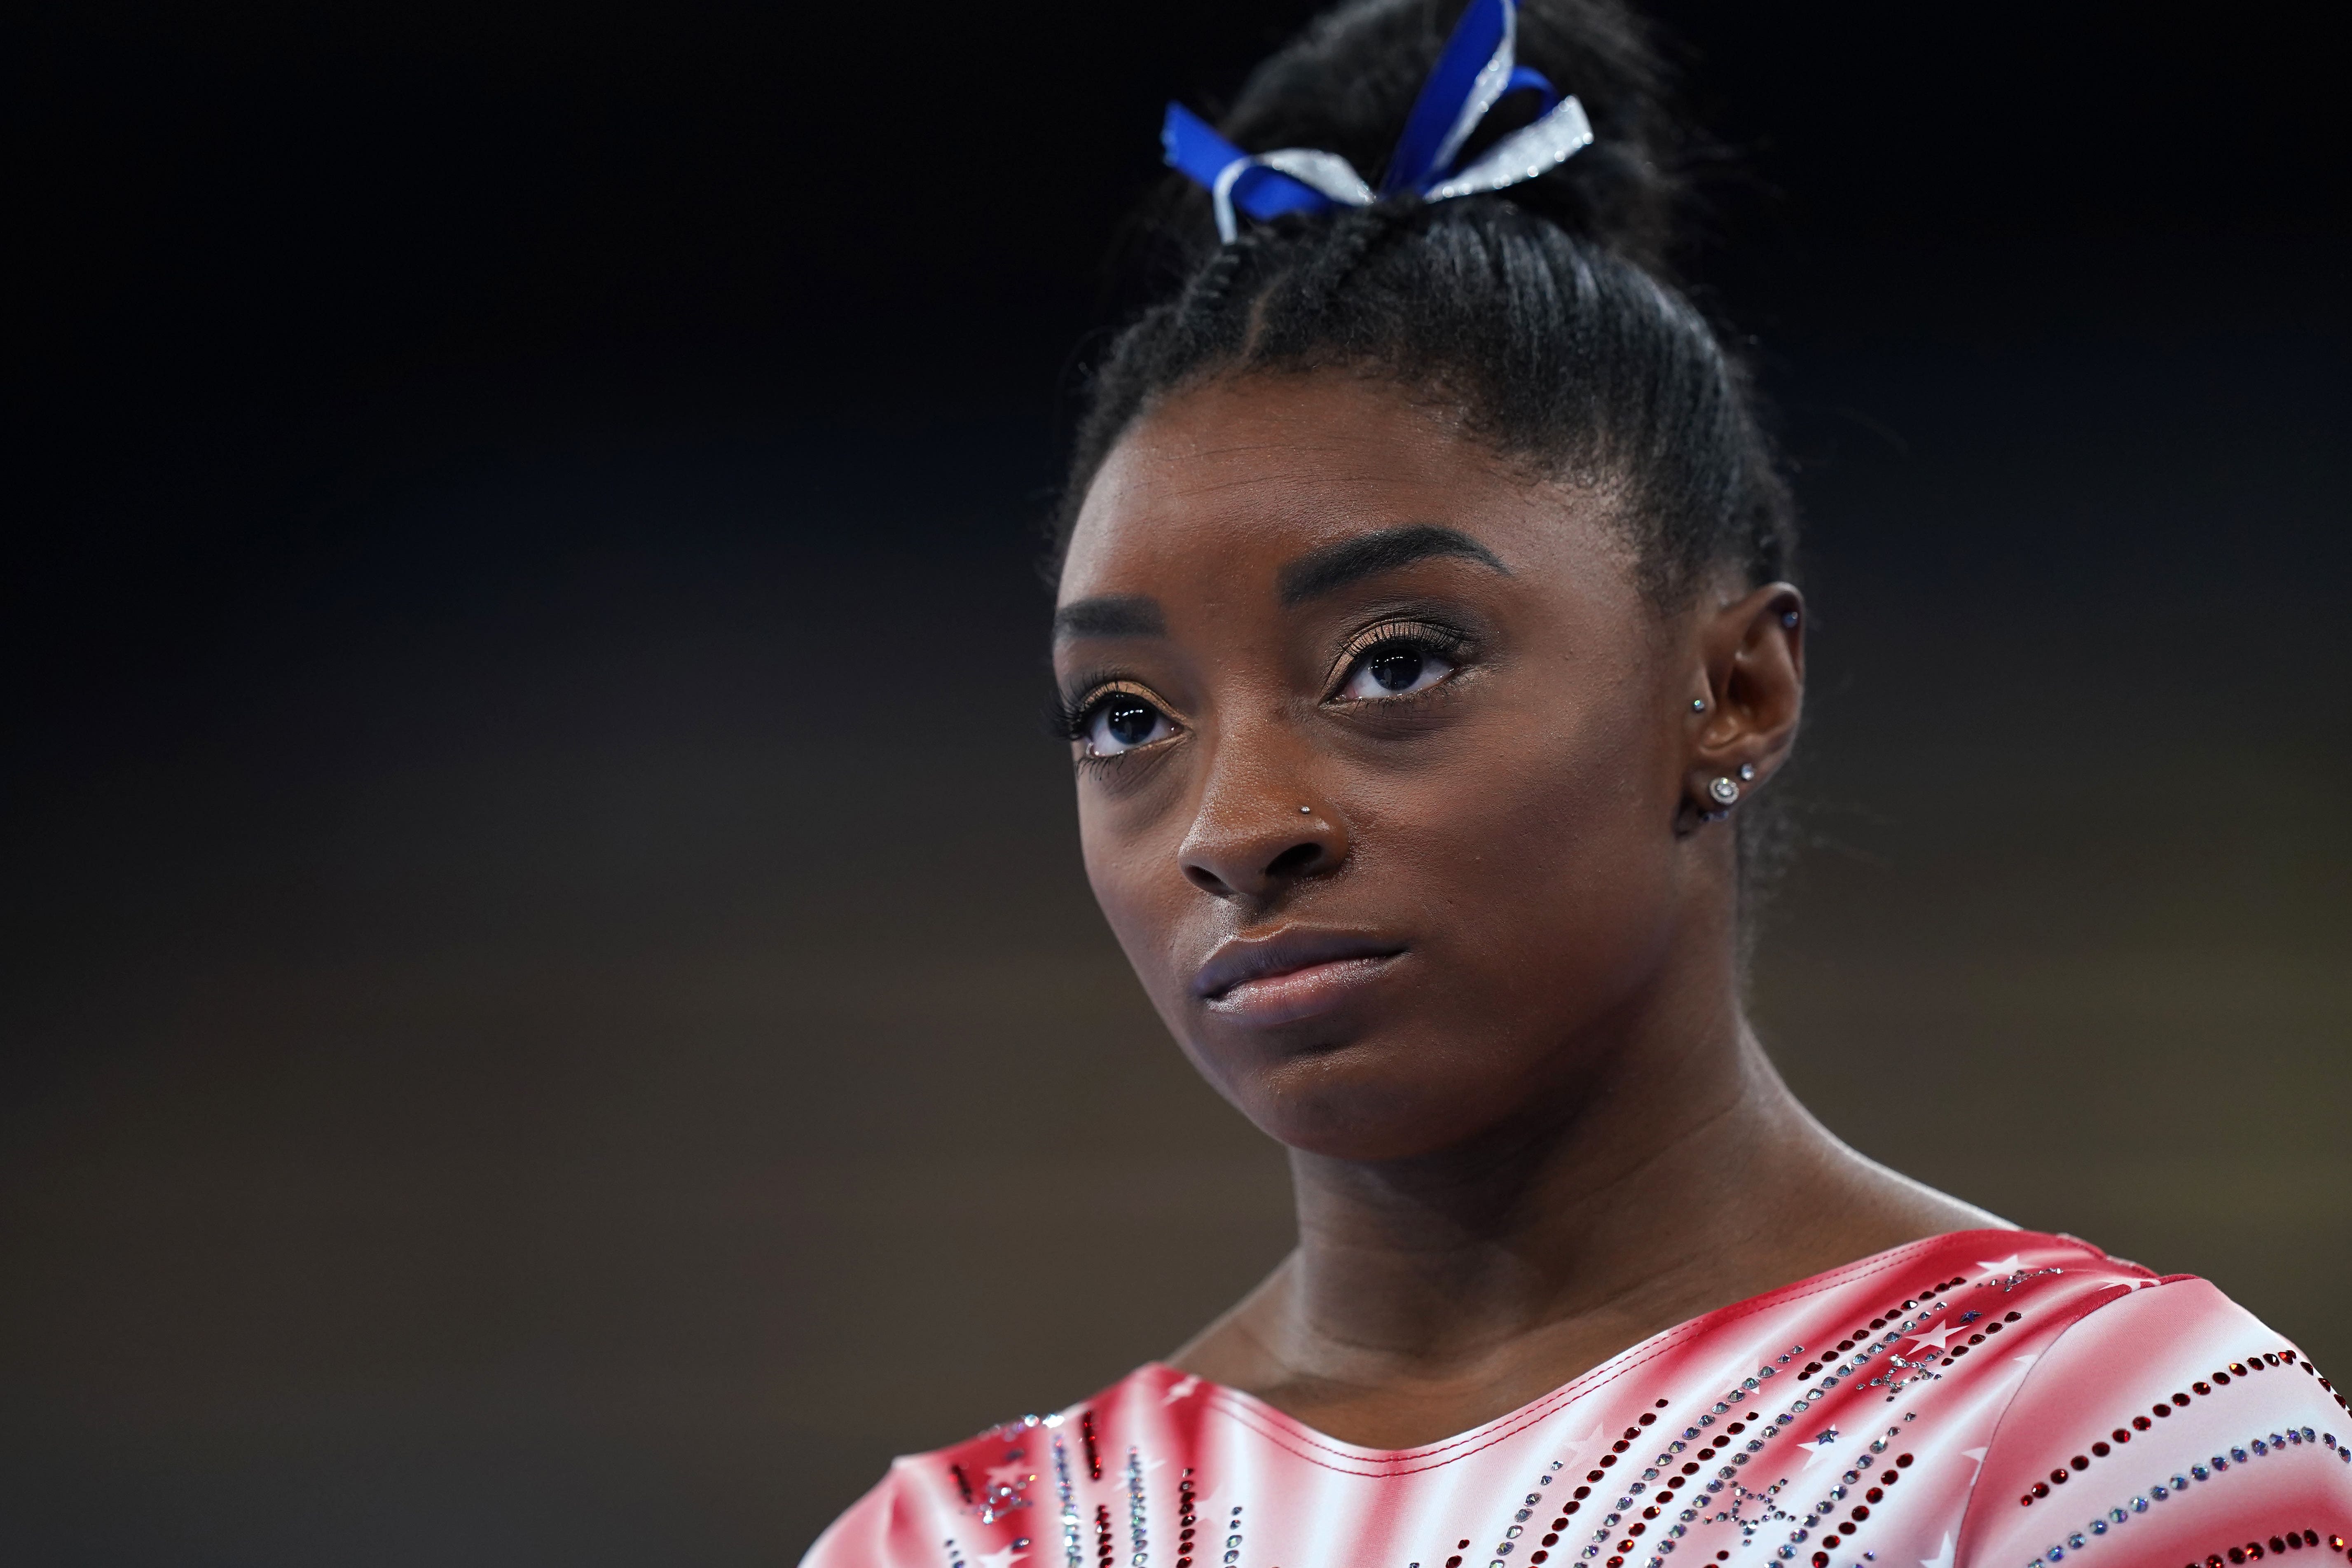 Simone Biles has helped change perceptions about mental health